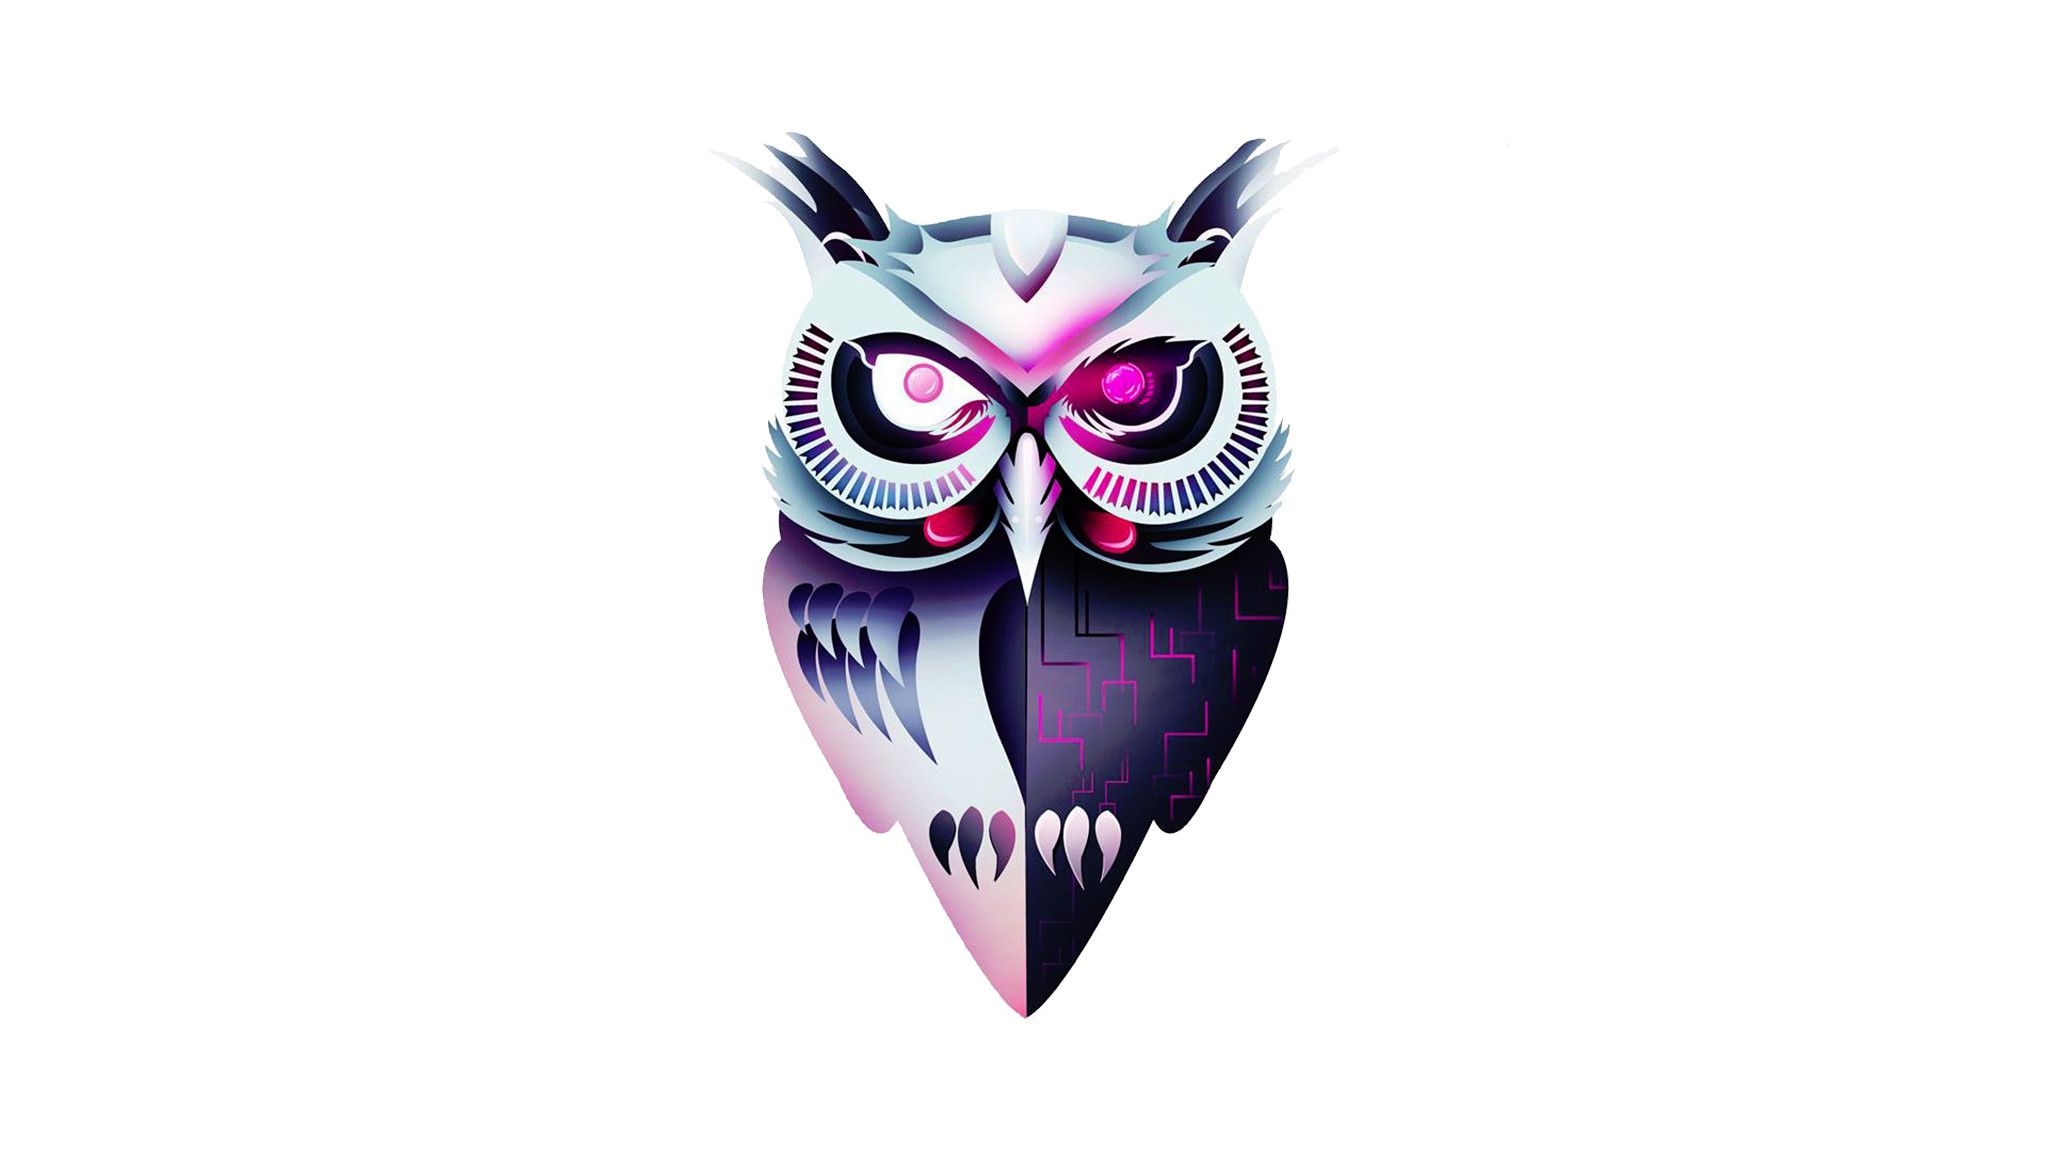 Made a 2K wallpaper from the futuristic owl pic